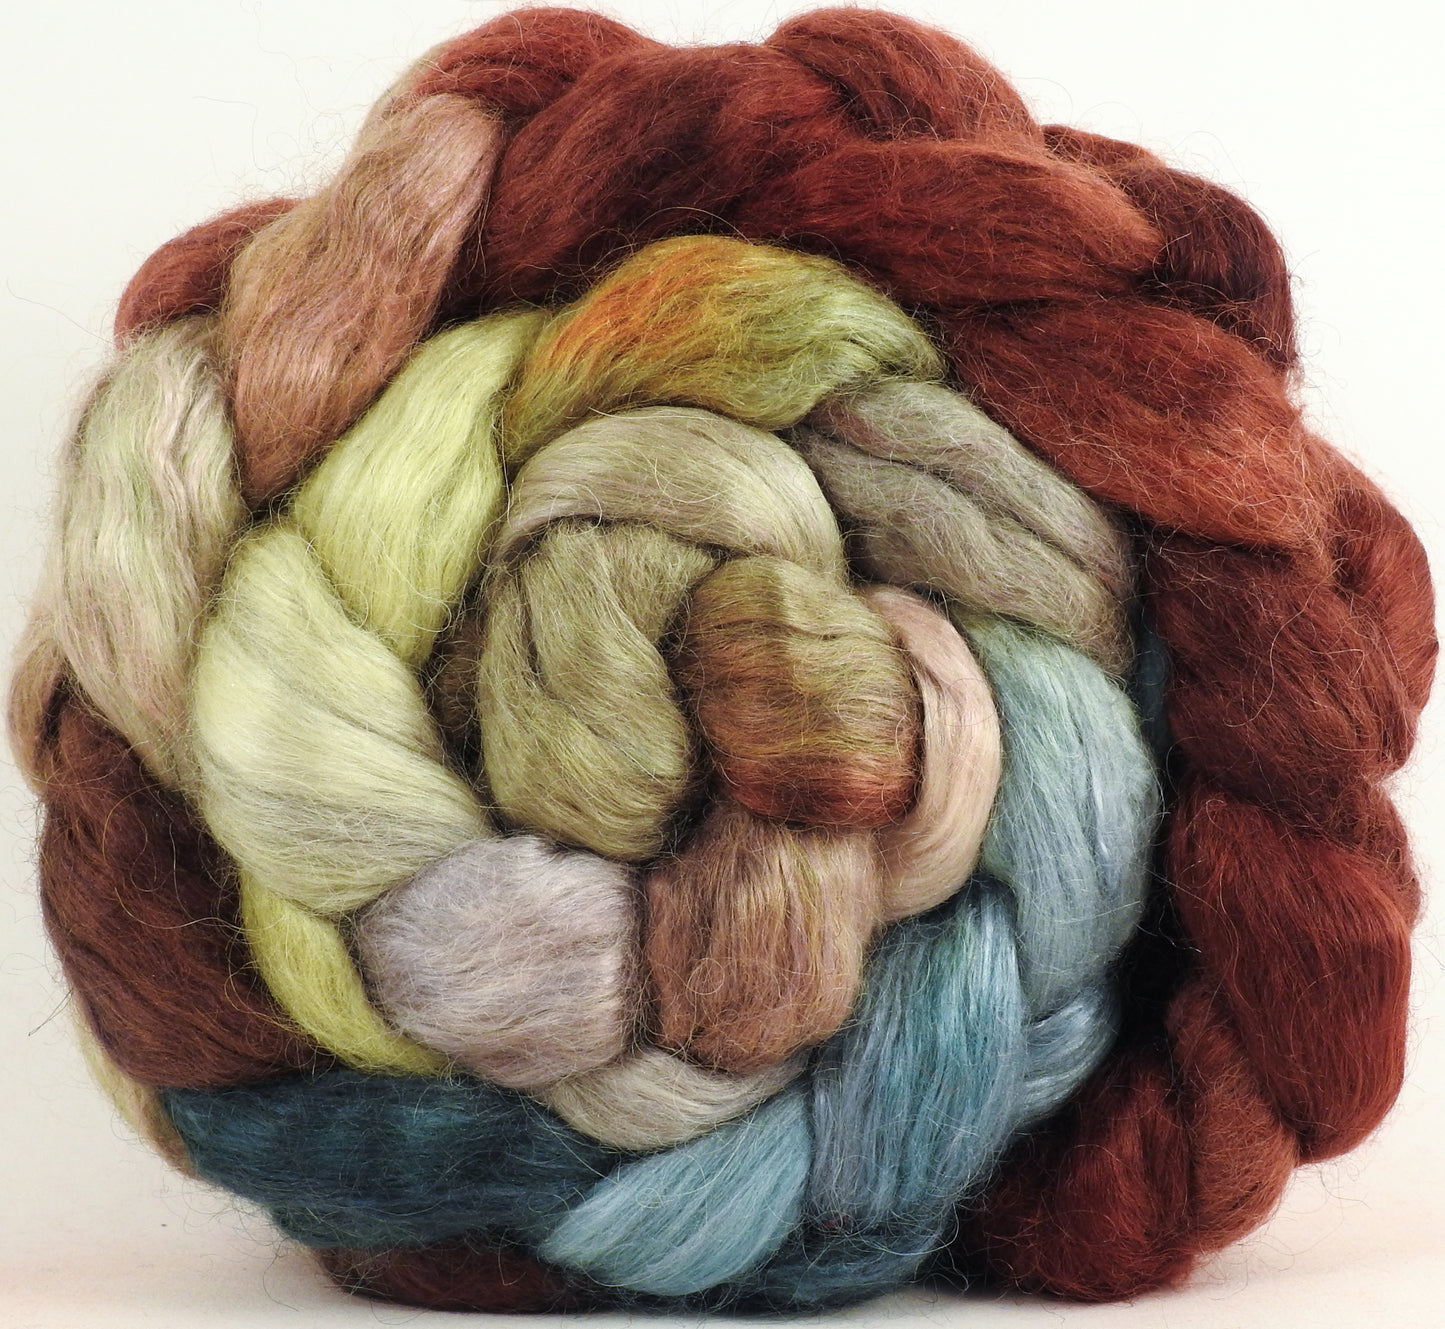 Hand-dyed wensleydale/ mulberry silk roving (65/35) -Winter Beech